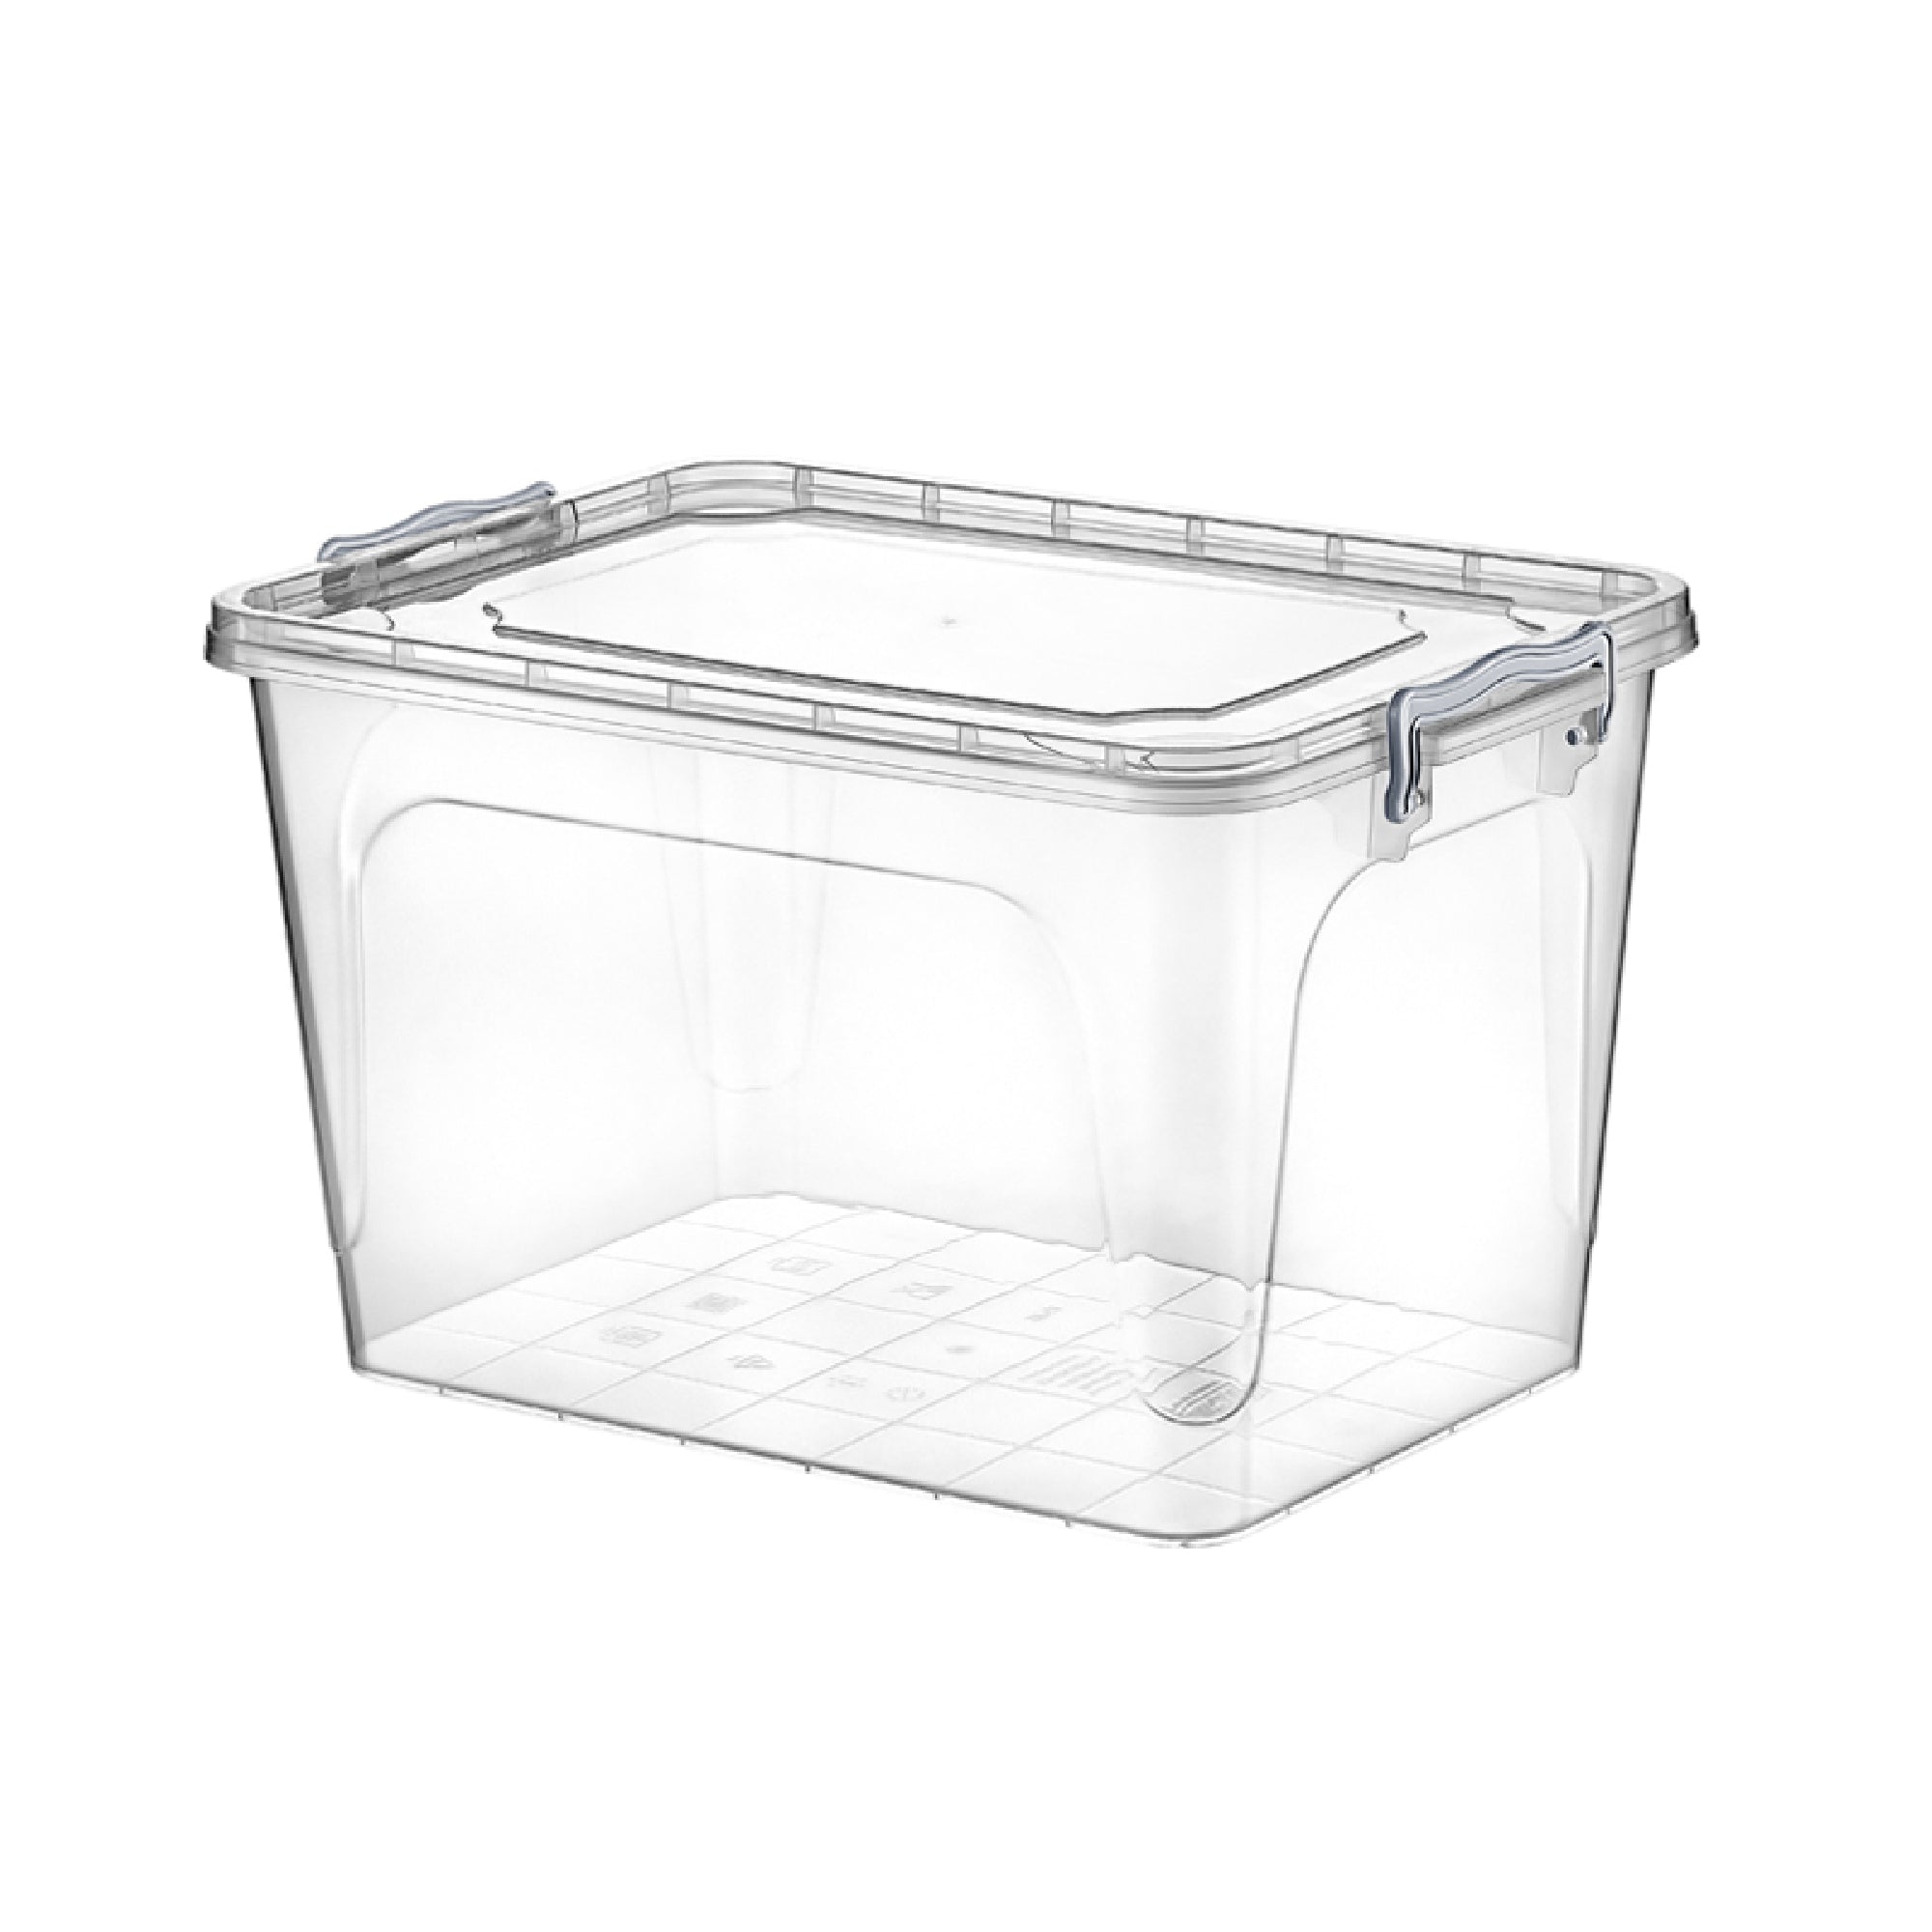 Hobby Life Plastic Storage Multi Storage Utility Container Box Rectangle 30L 021106